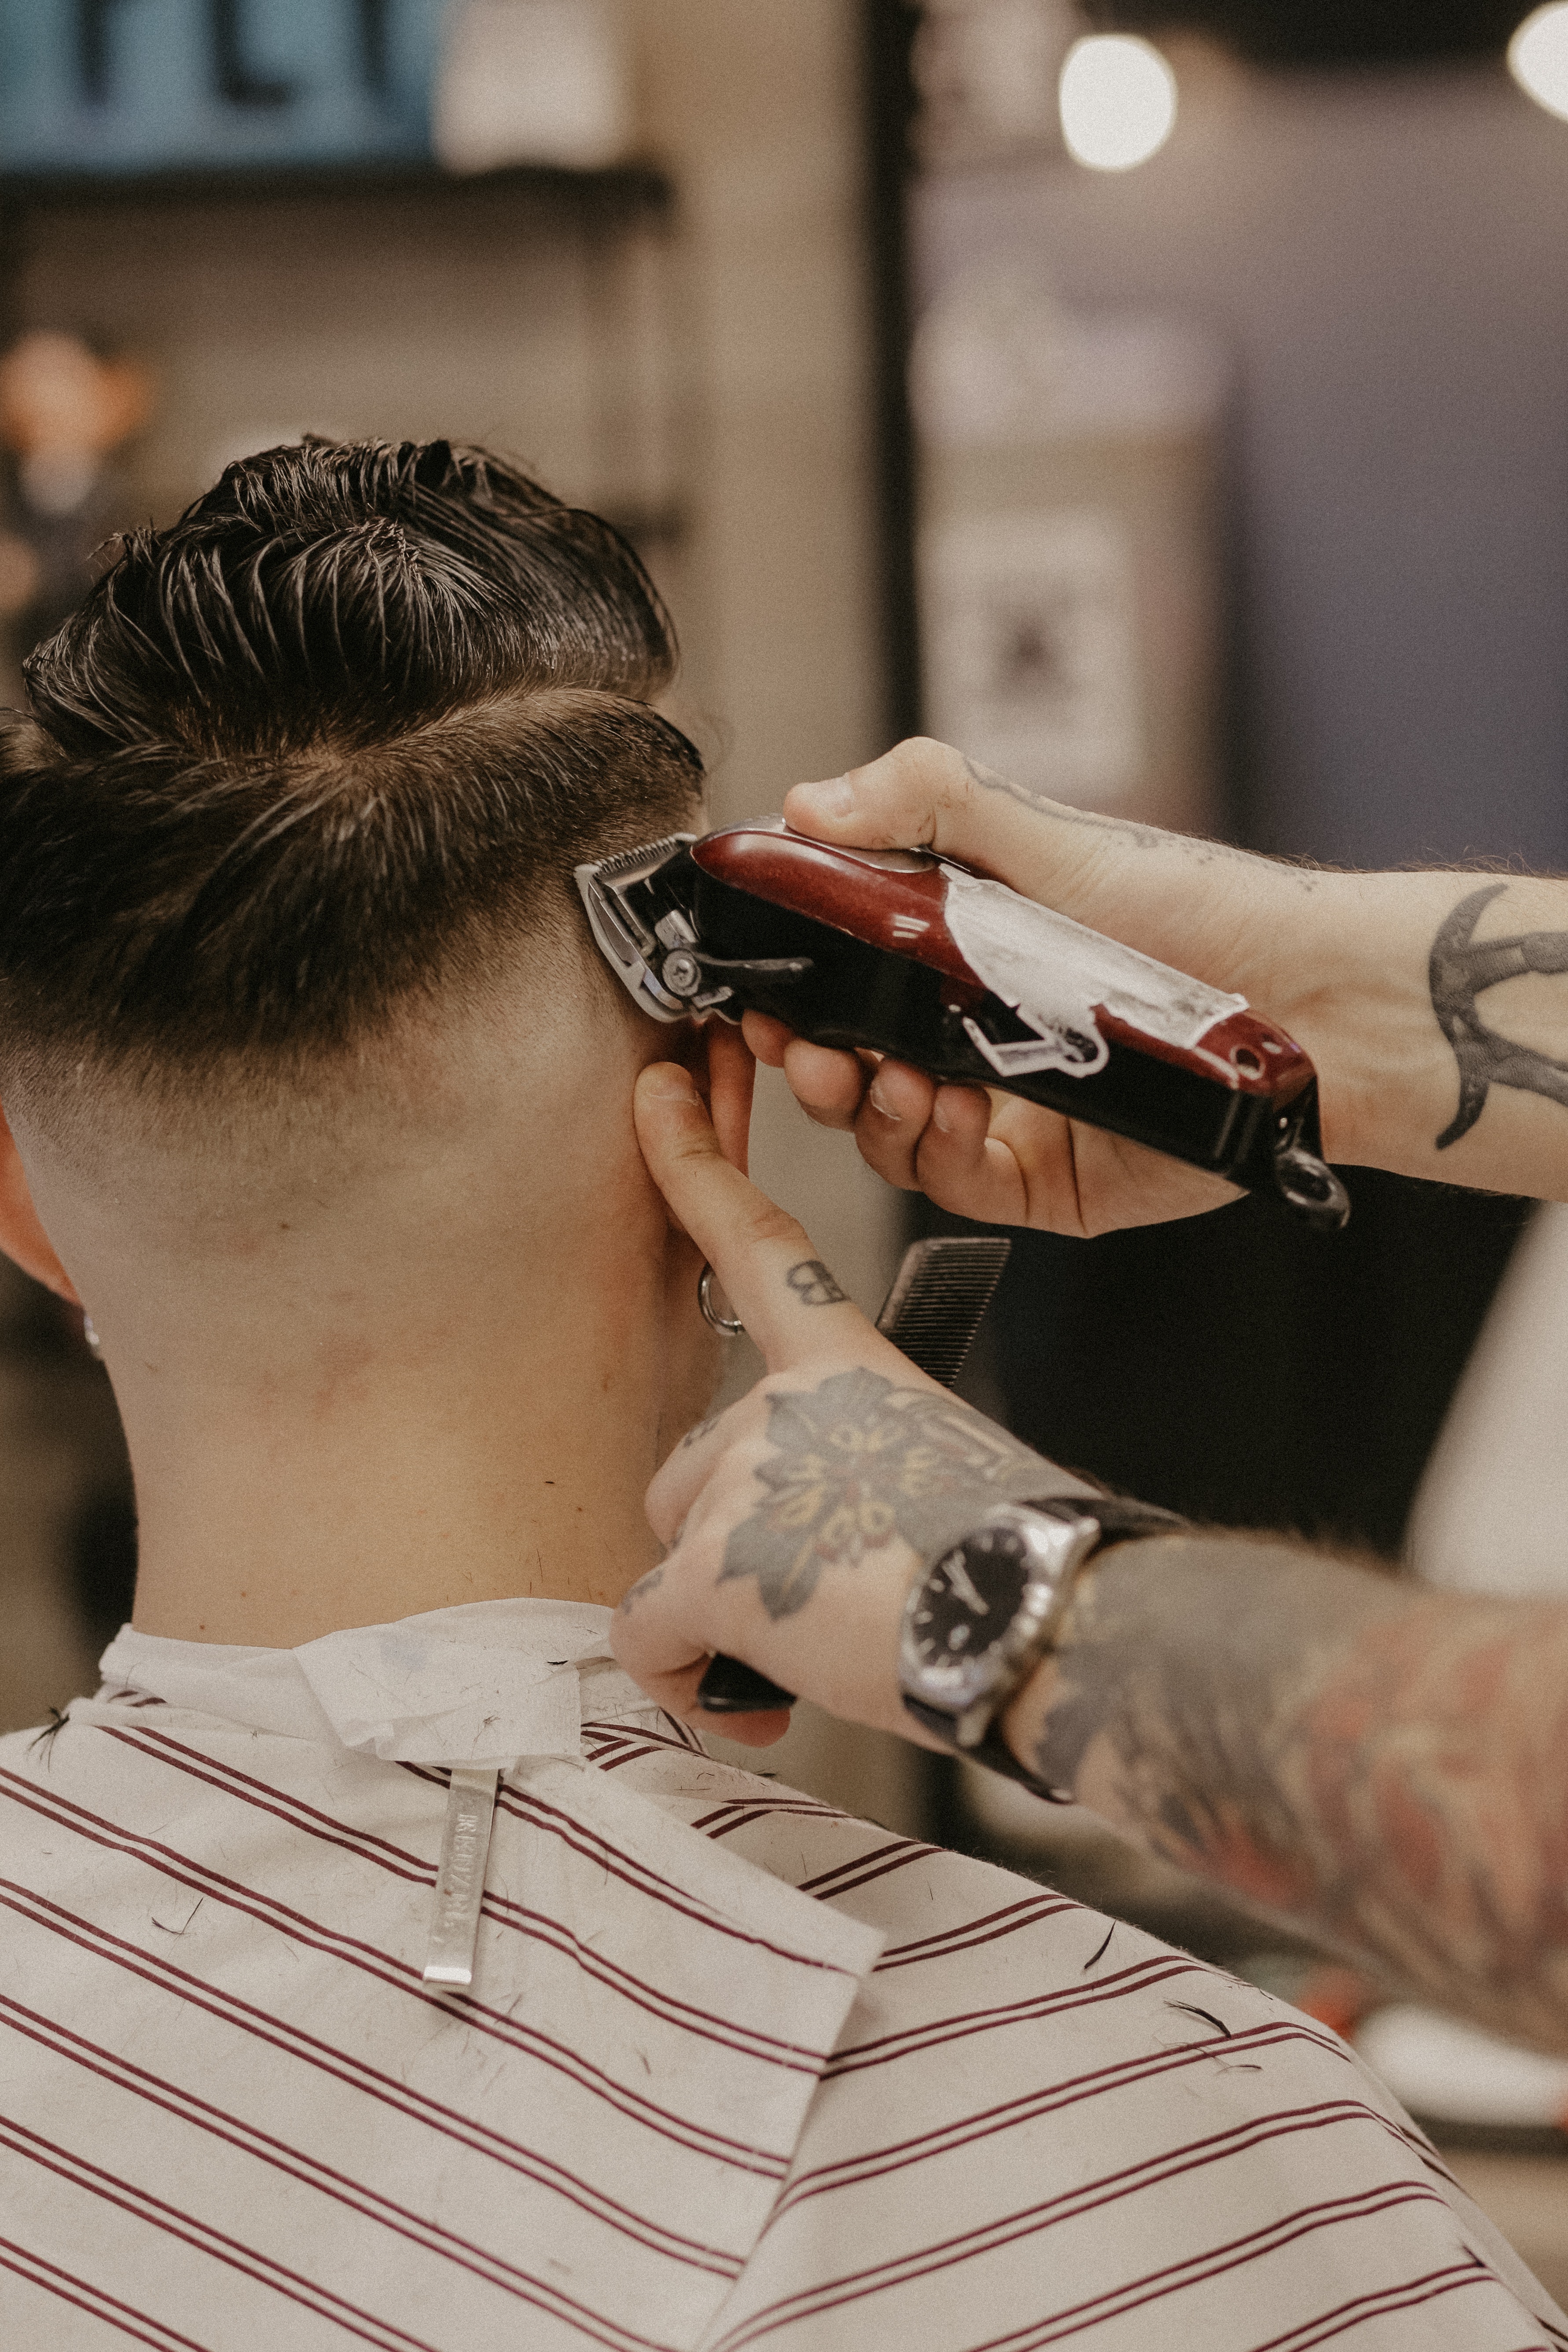 Men's haircare and style trends for 2023, from edgy fades to sea salt sprays